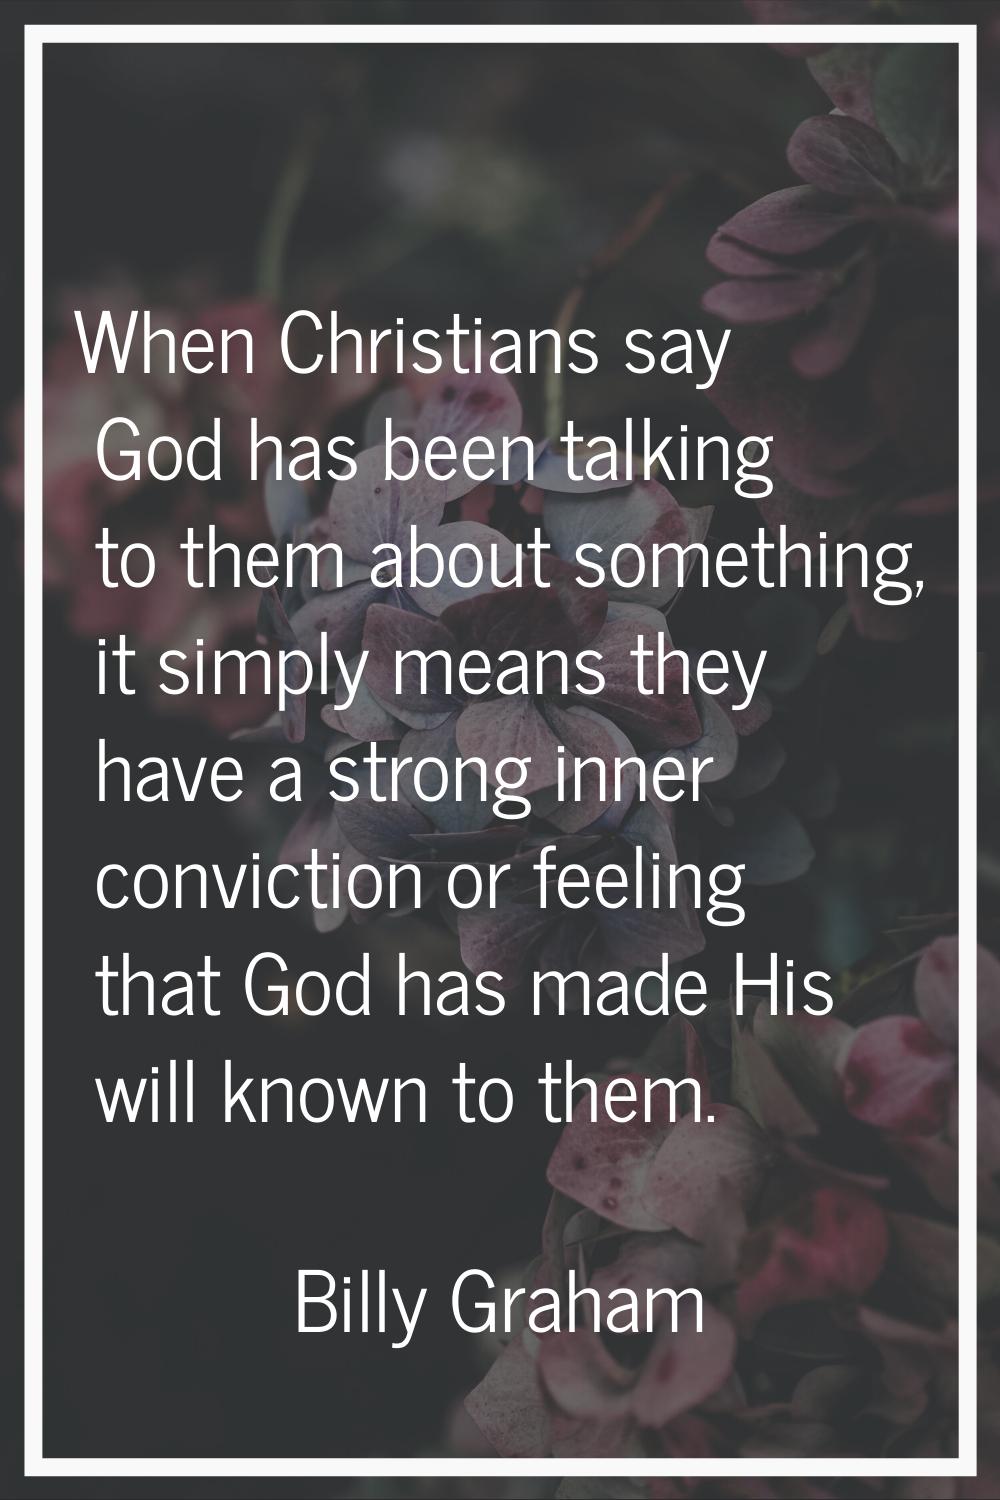 When Christians say God has been talking to them about something, it simply means they have a stron